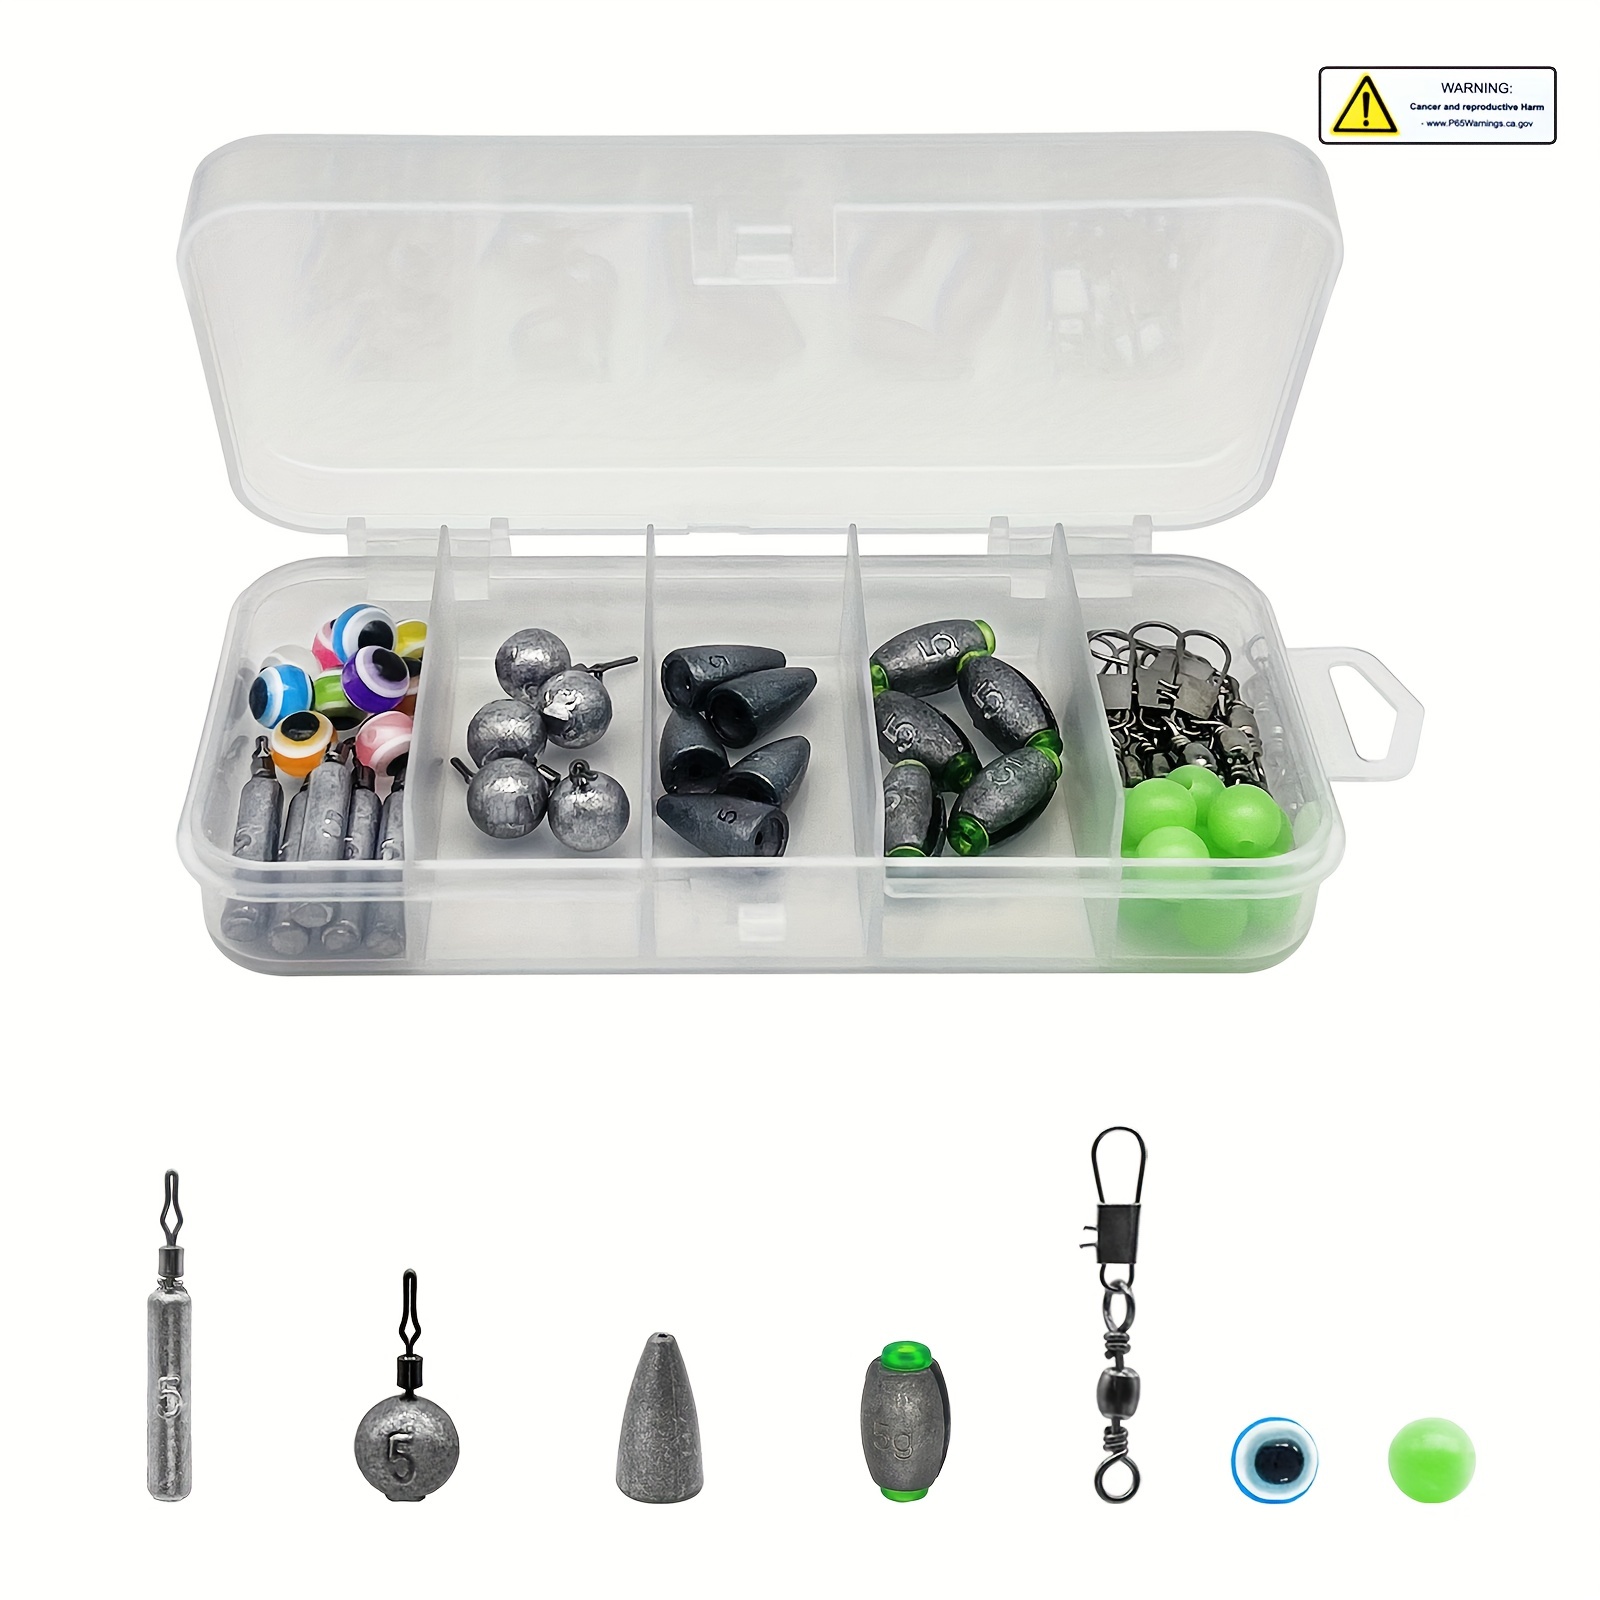 Complete Fishing Tackle Kit With Sinkers, Beads, Swivels, And Rigs